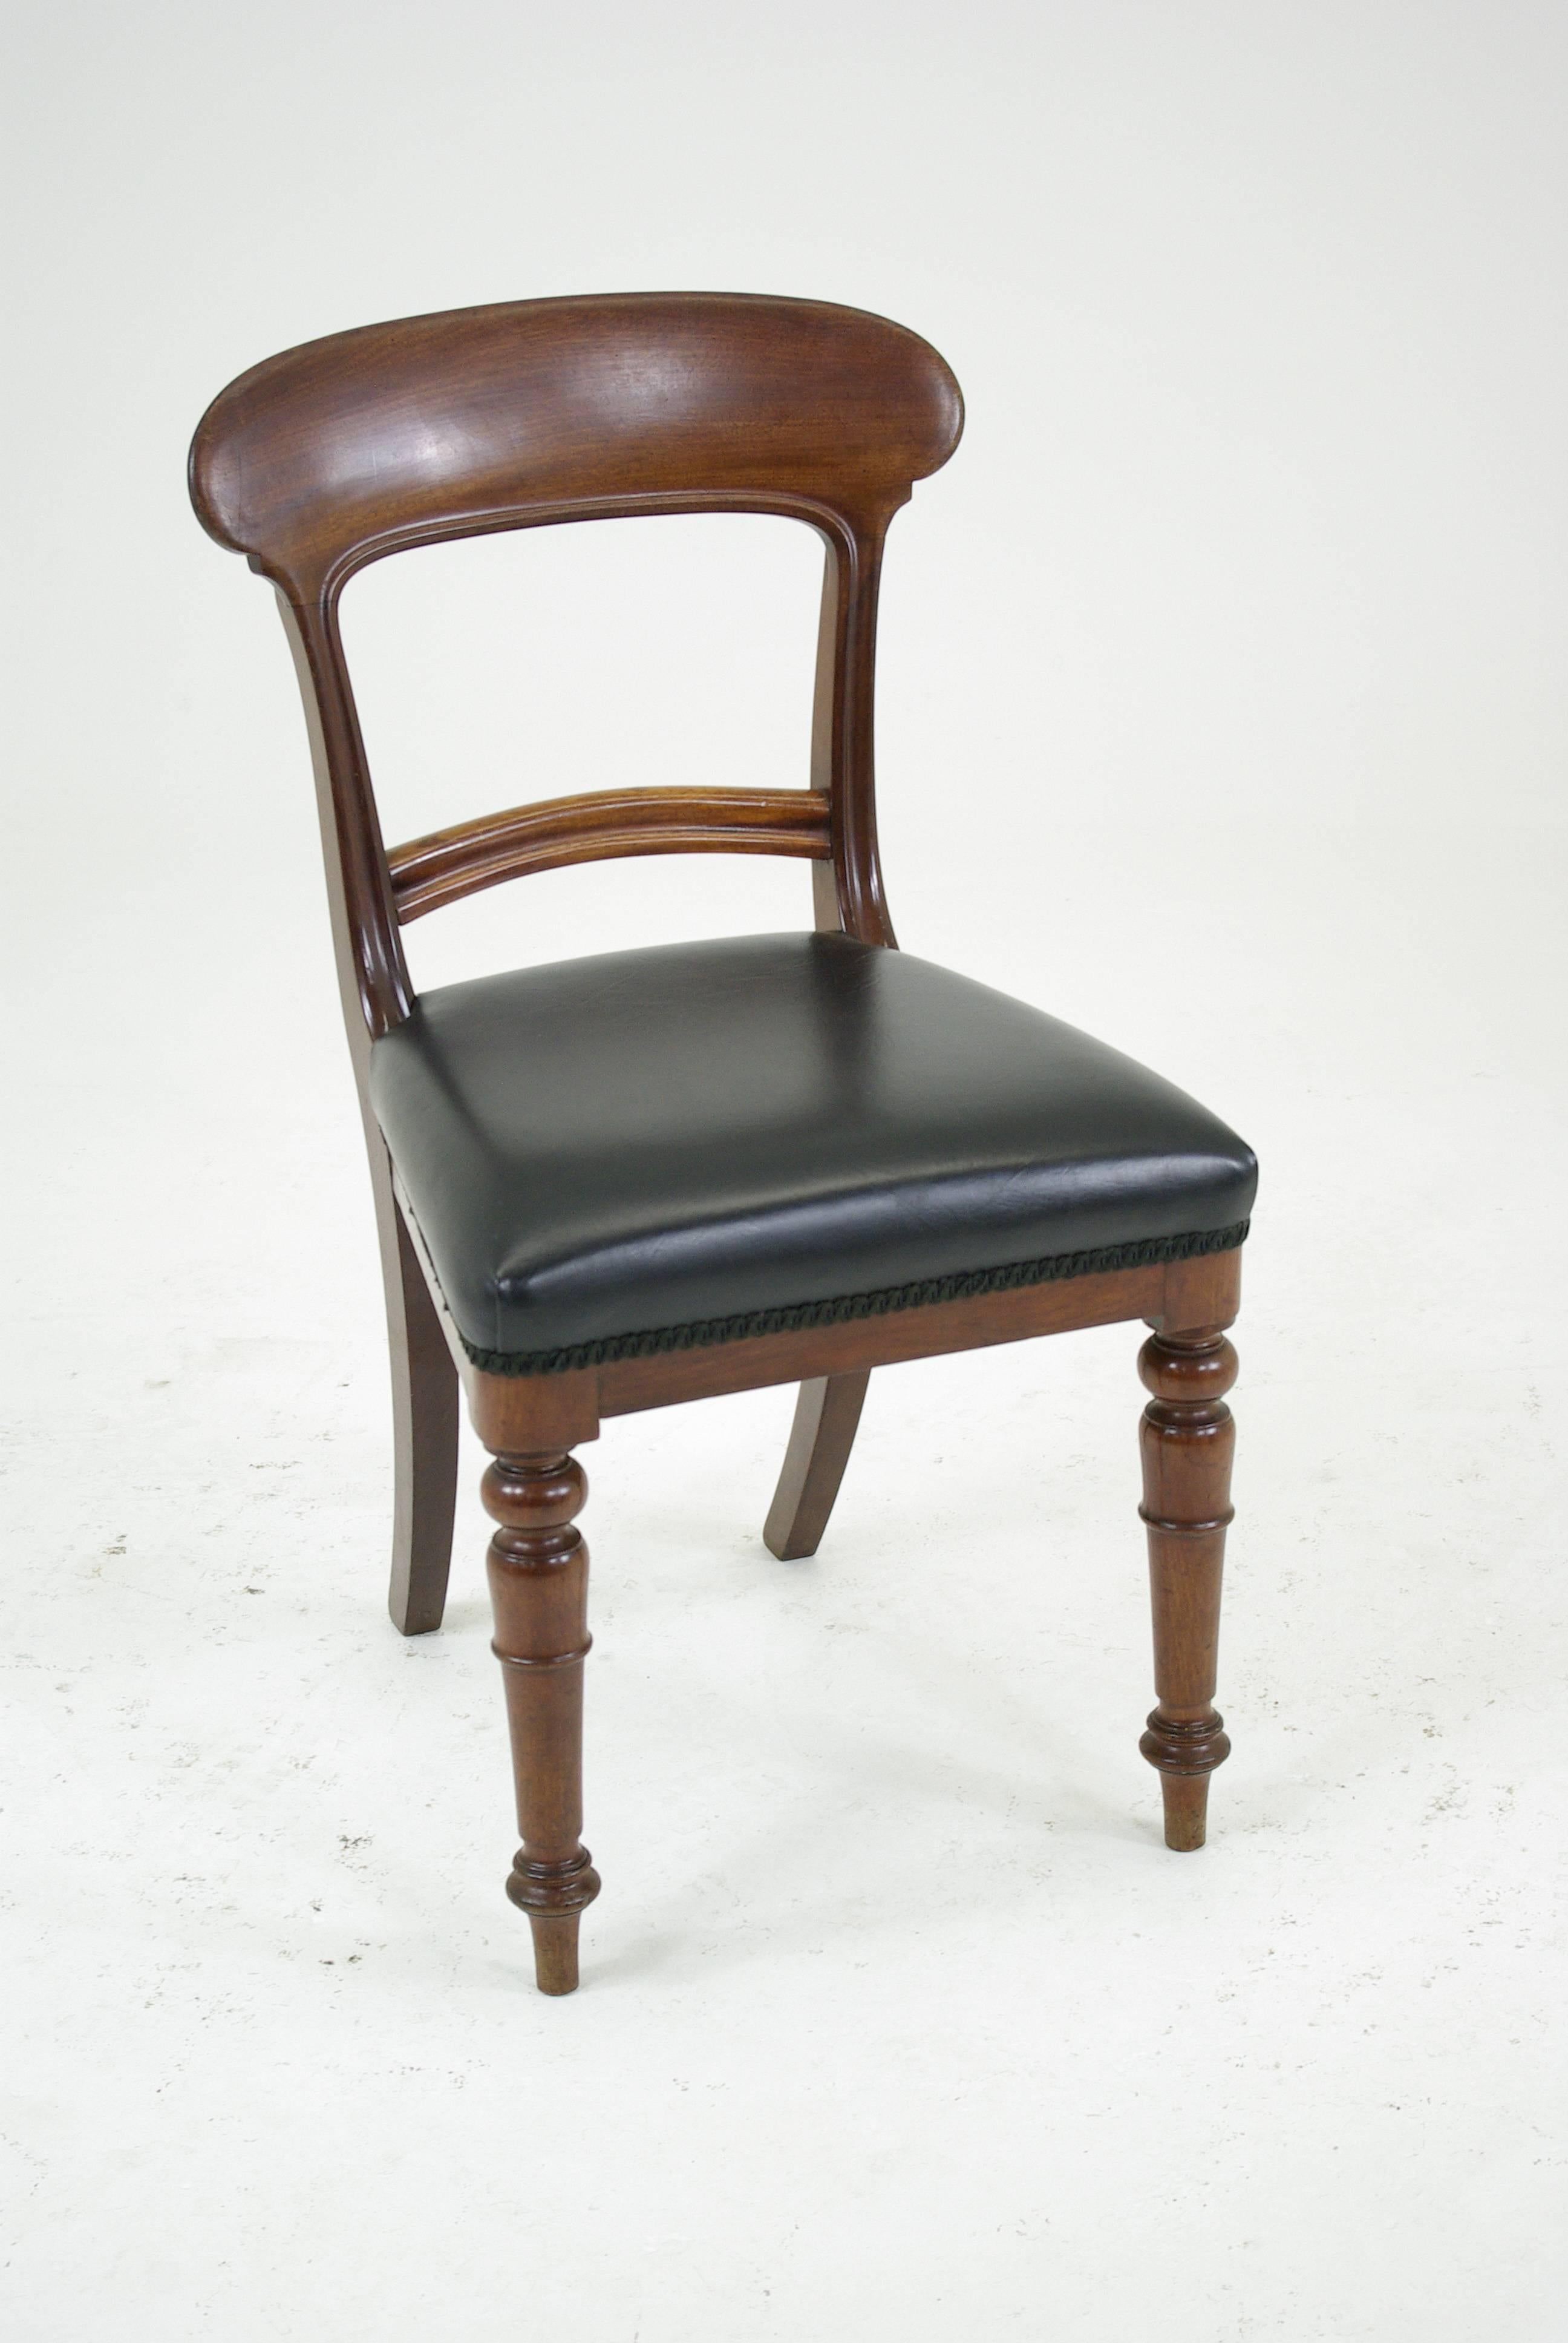 Set of six Victorian mahogany dining chairs with upholstered seats,

Scotland, 1860.
All original finish.
Solid mahogany construction.
Curved top rail.
Shaped center rail.
Upholstered seats (vinyl).
Very comfortable chairs.
Structurally